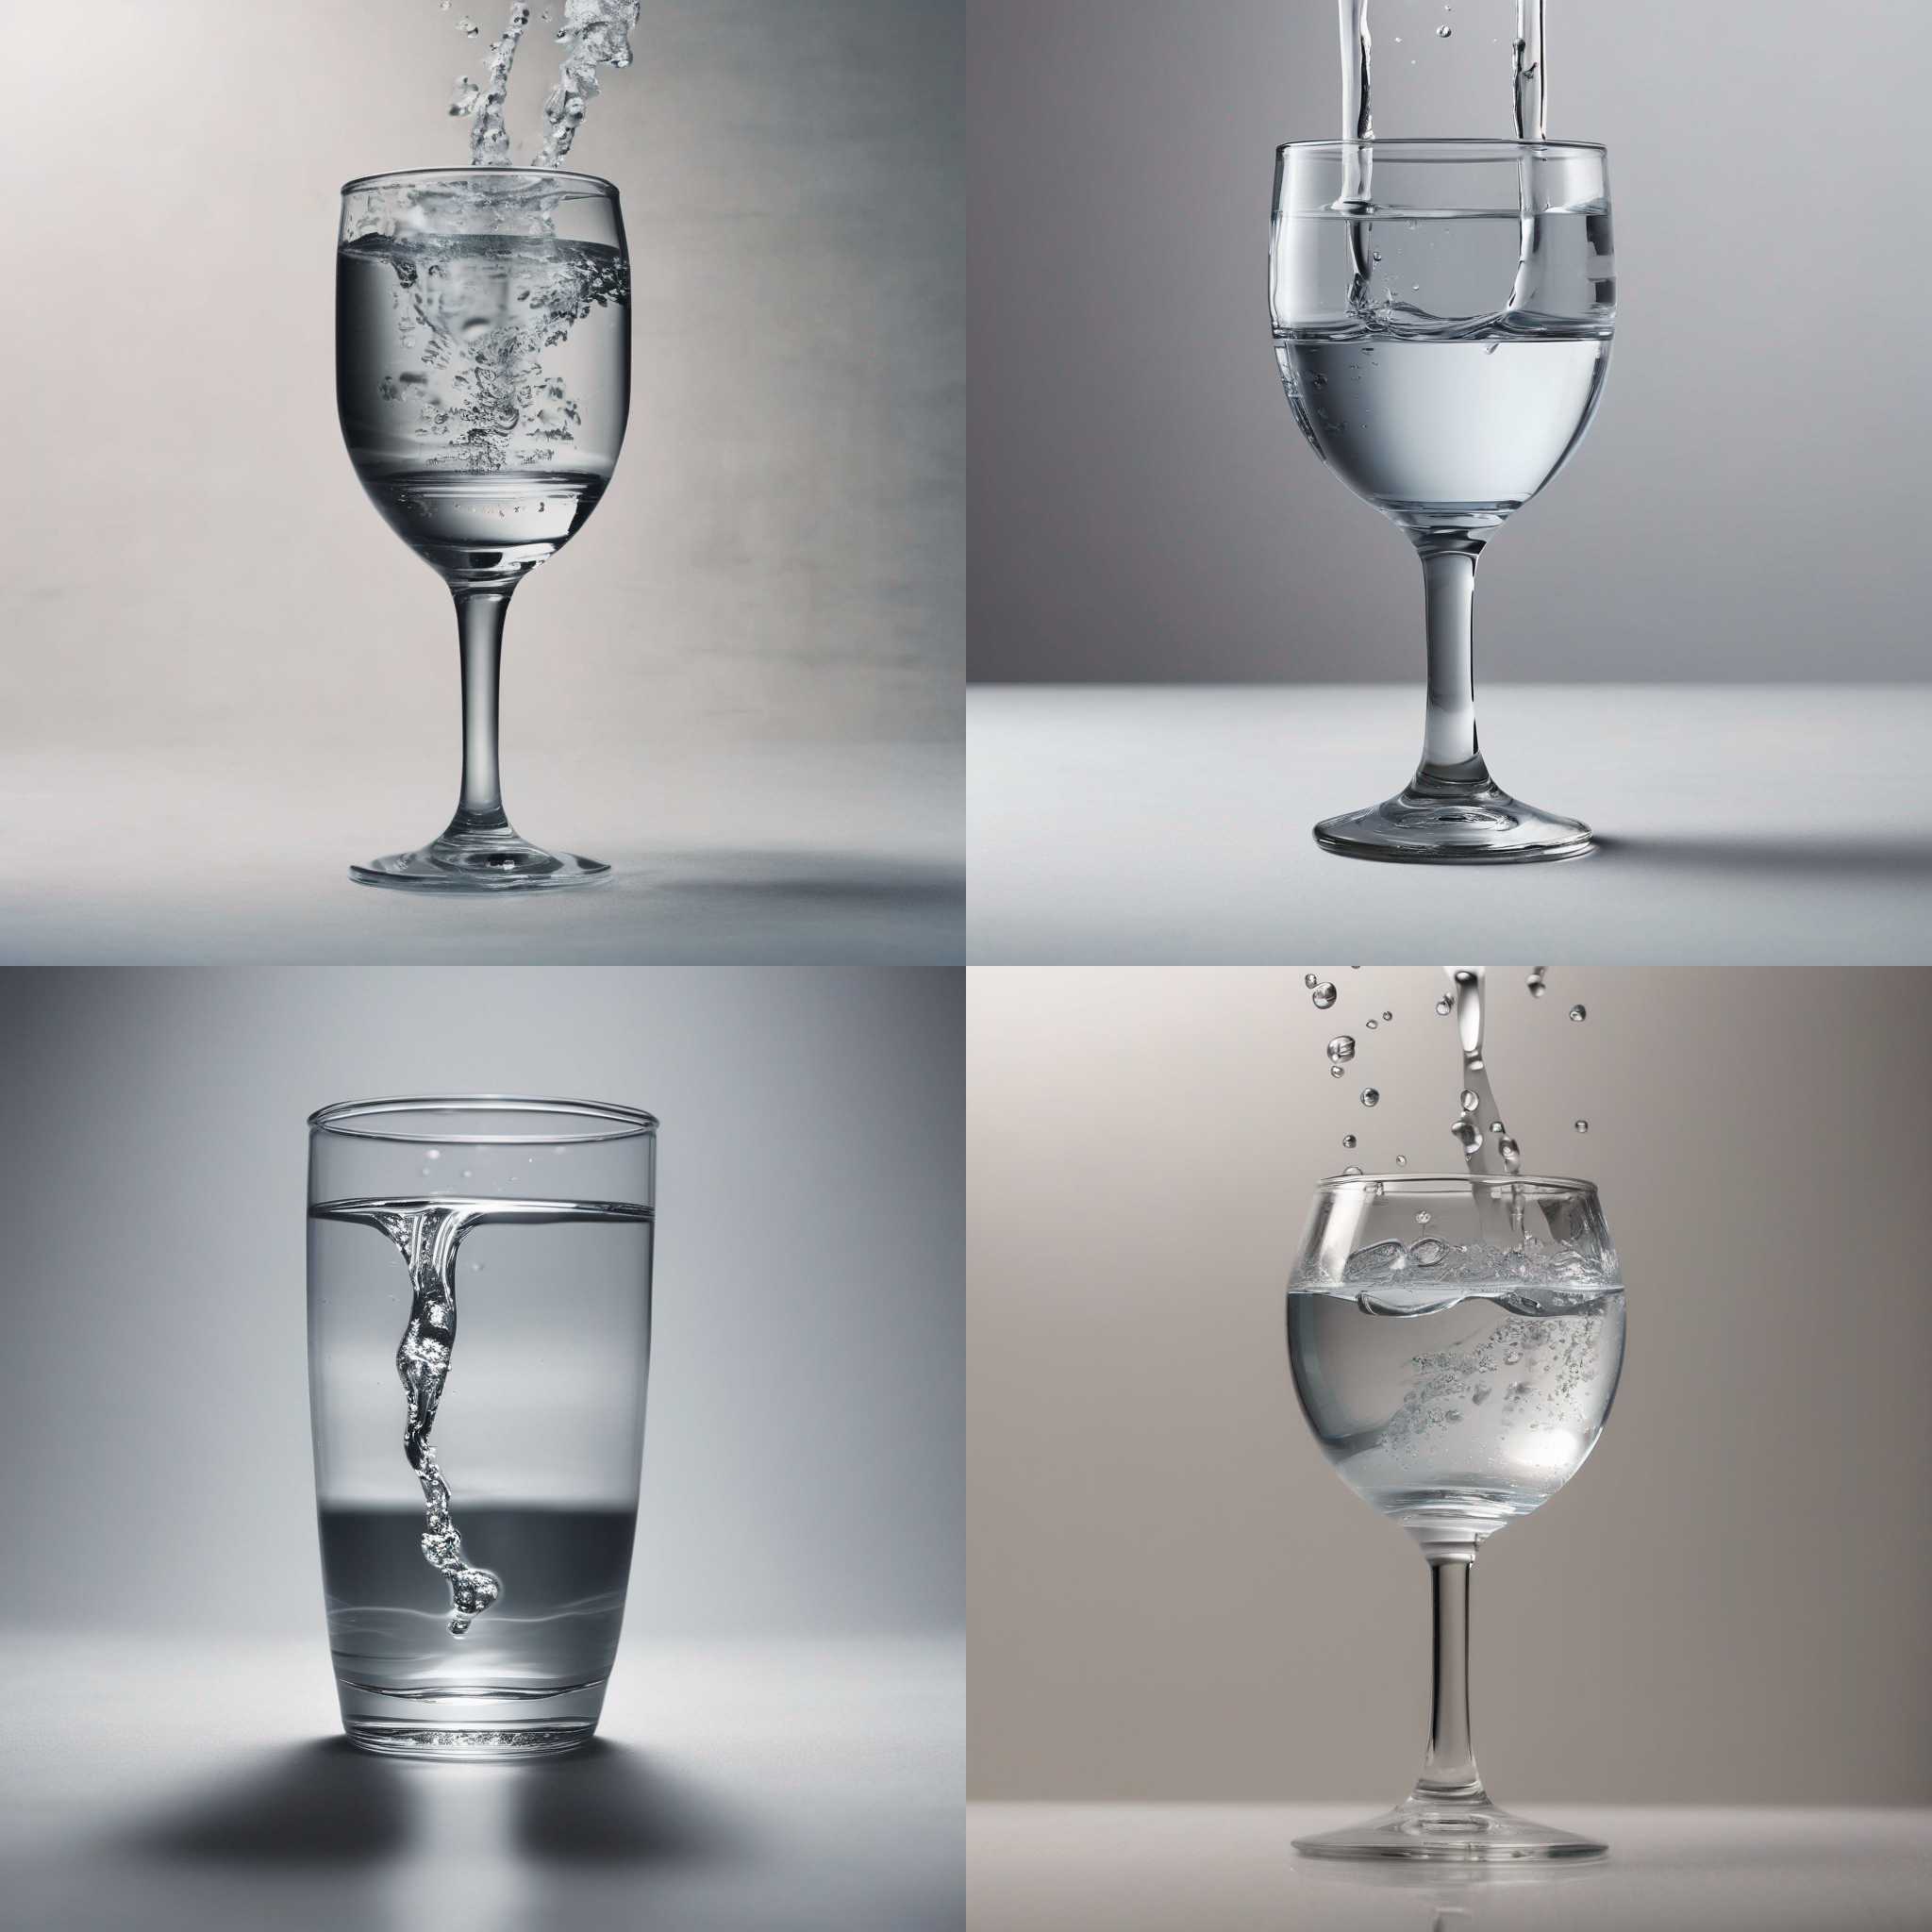 A glass of water held upside-down